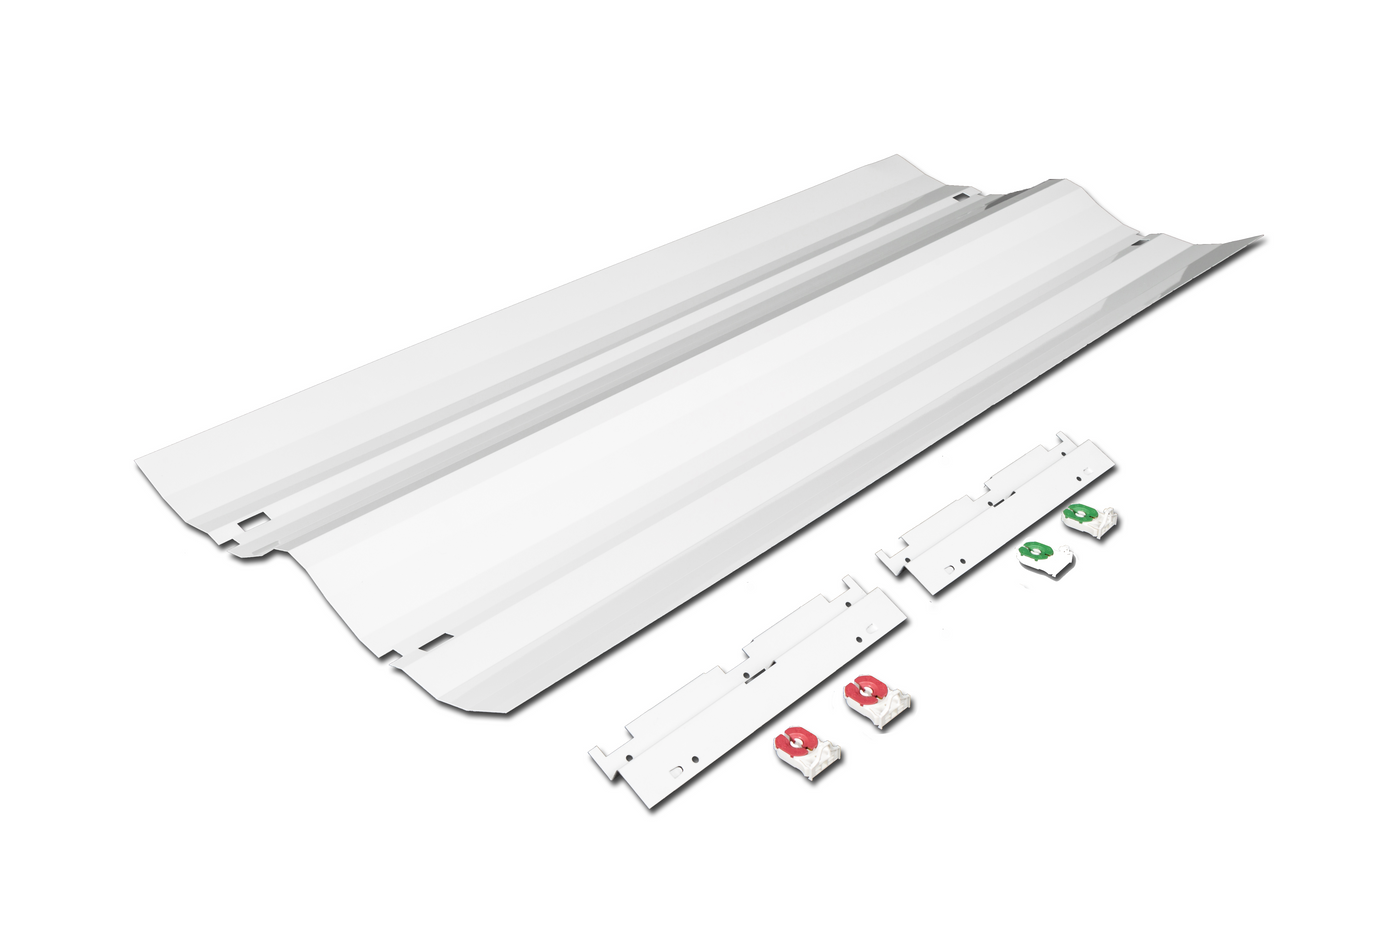 2 x 4 Foot Retrofit Kit White or Mirrored Reflector for Troffer Body 4500-5625 Lumen 2 or 3 18W LED 4000K Lamps Included